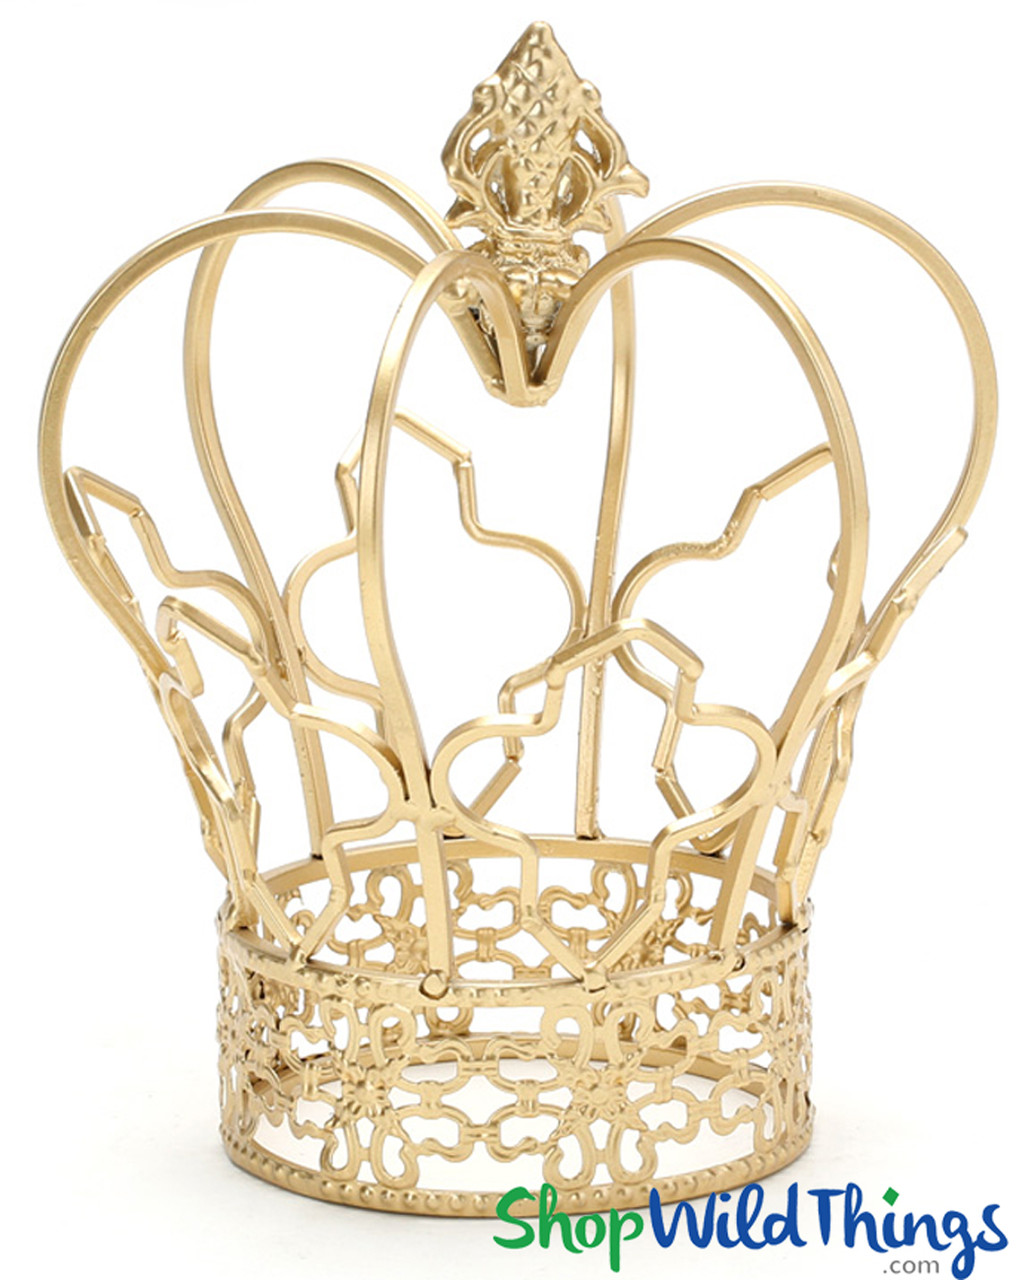 Gold crown party decor princess or bed crown